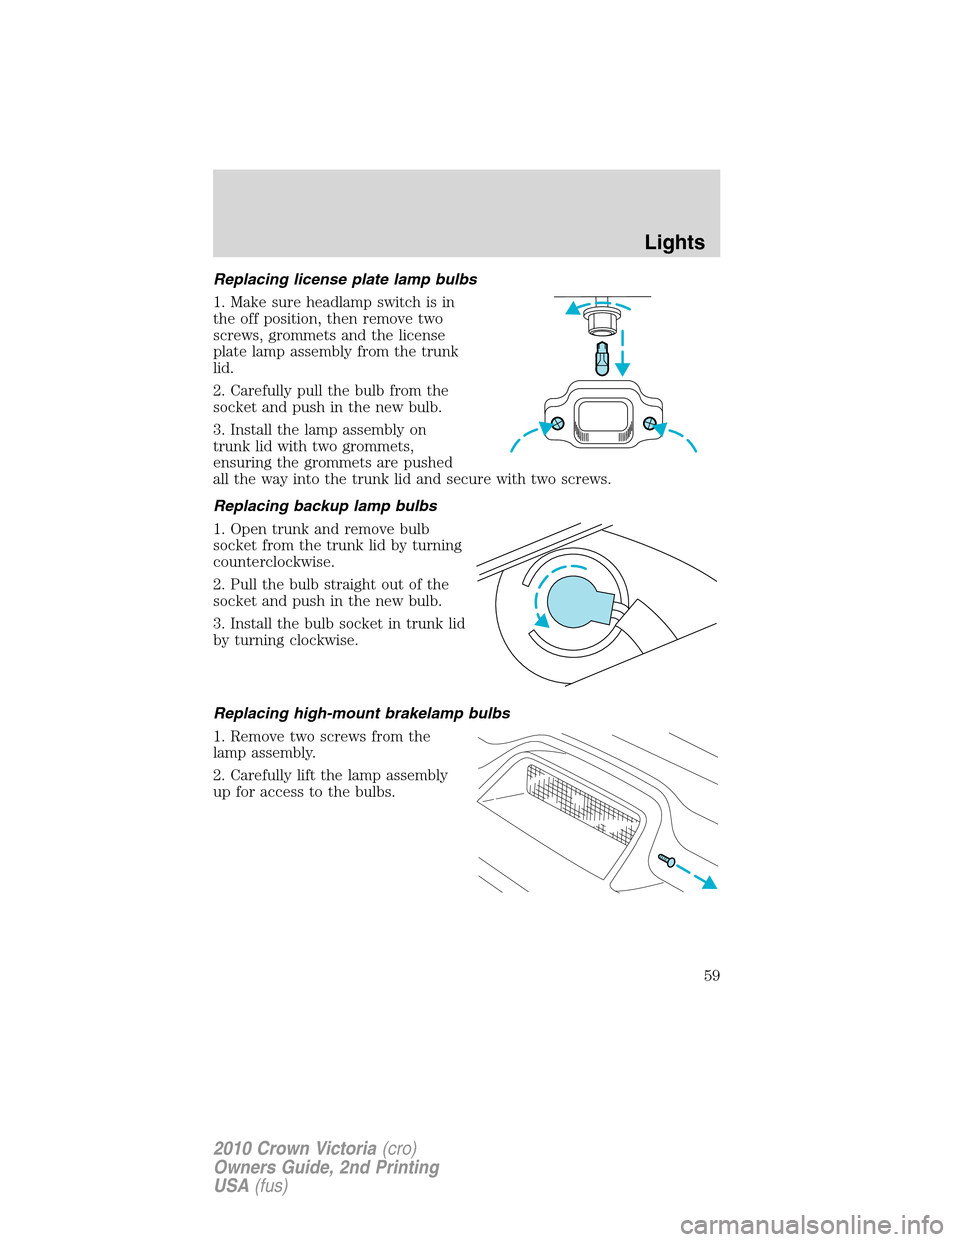 Mercury Grand Marquis 2010  s User Guide Replacing license plate lamp bulbs
1. Make sure headlamp switch is in
the off position, then remove two
screws, grommets and the license
plate lamp assembly from the trunk
lid.
2. Carefully pull the b